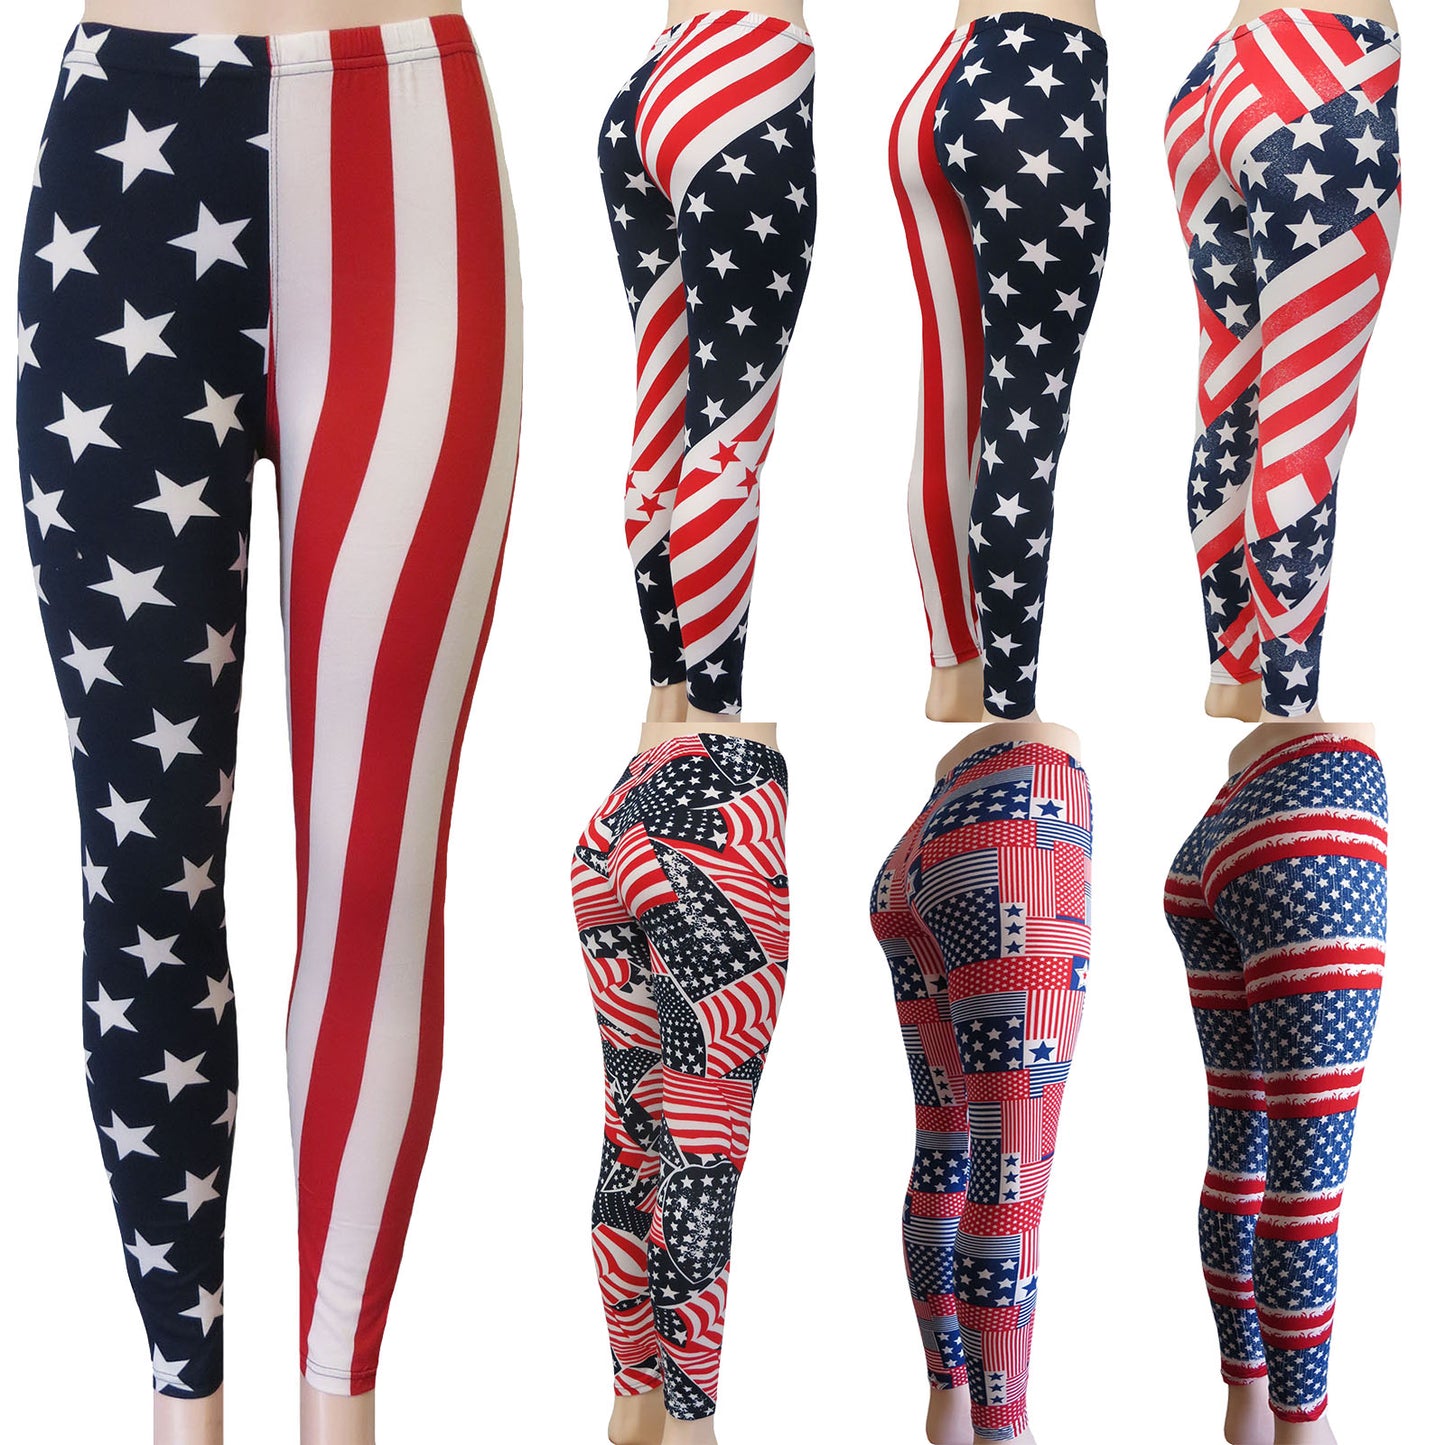 Wholesale USA American Flag Leggings Patriotic Red White and Blue Americana Pants